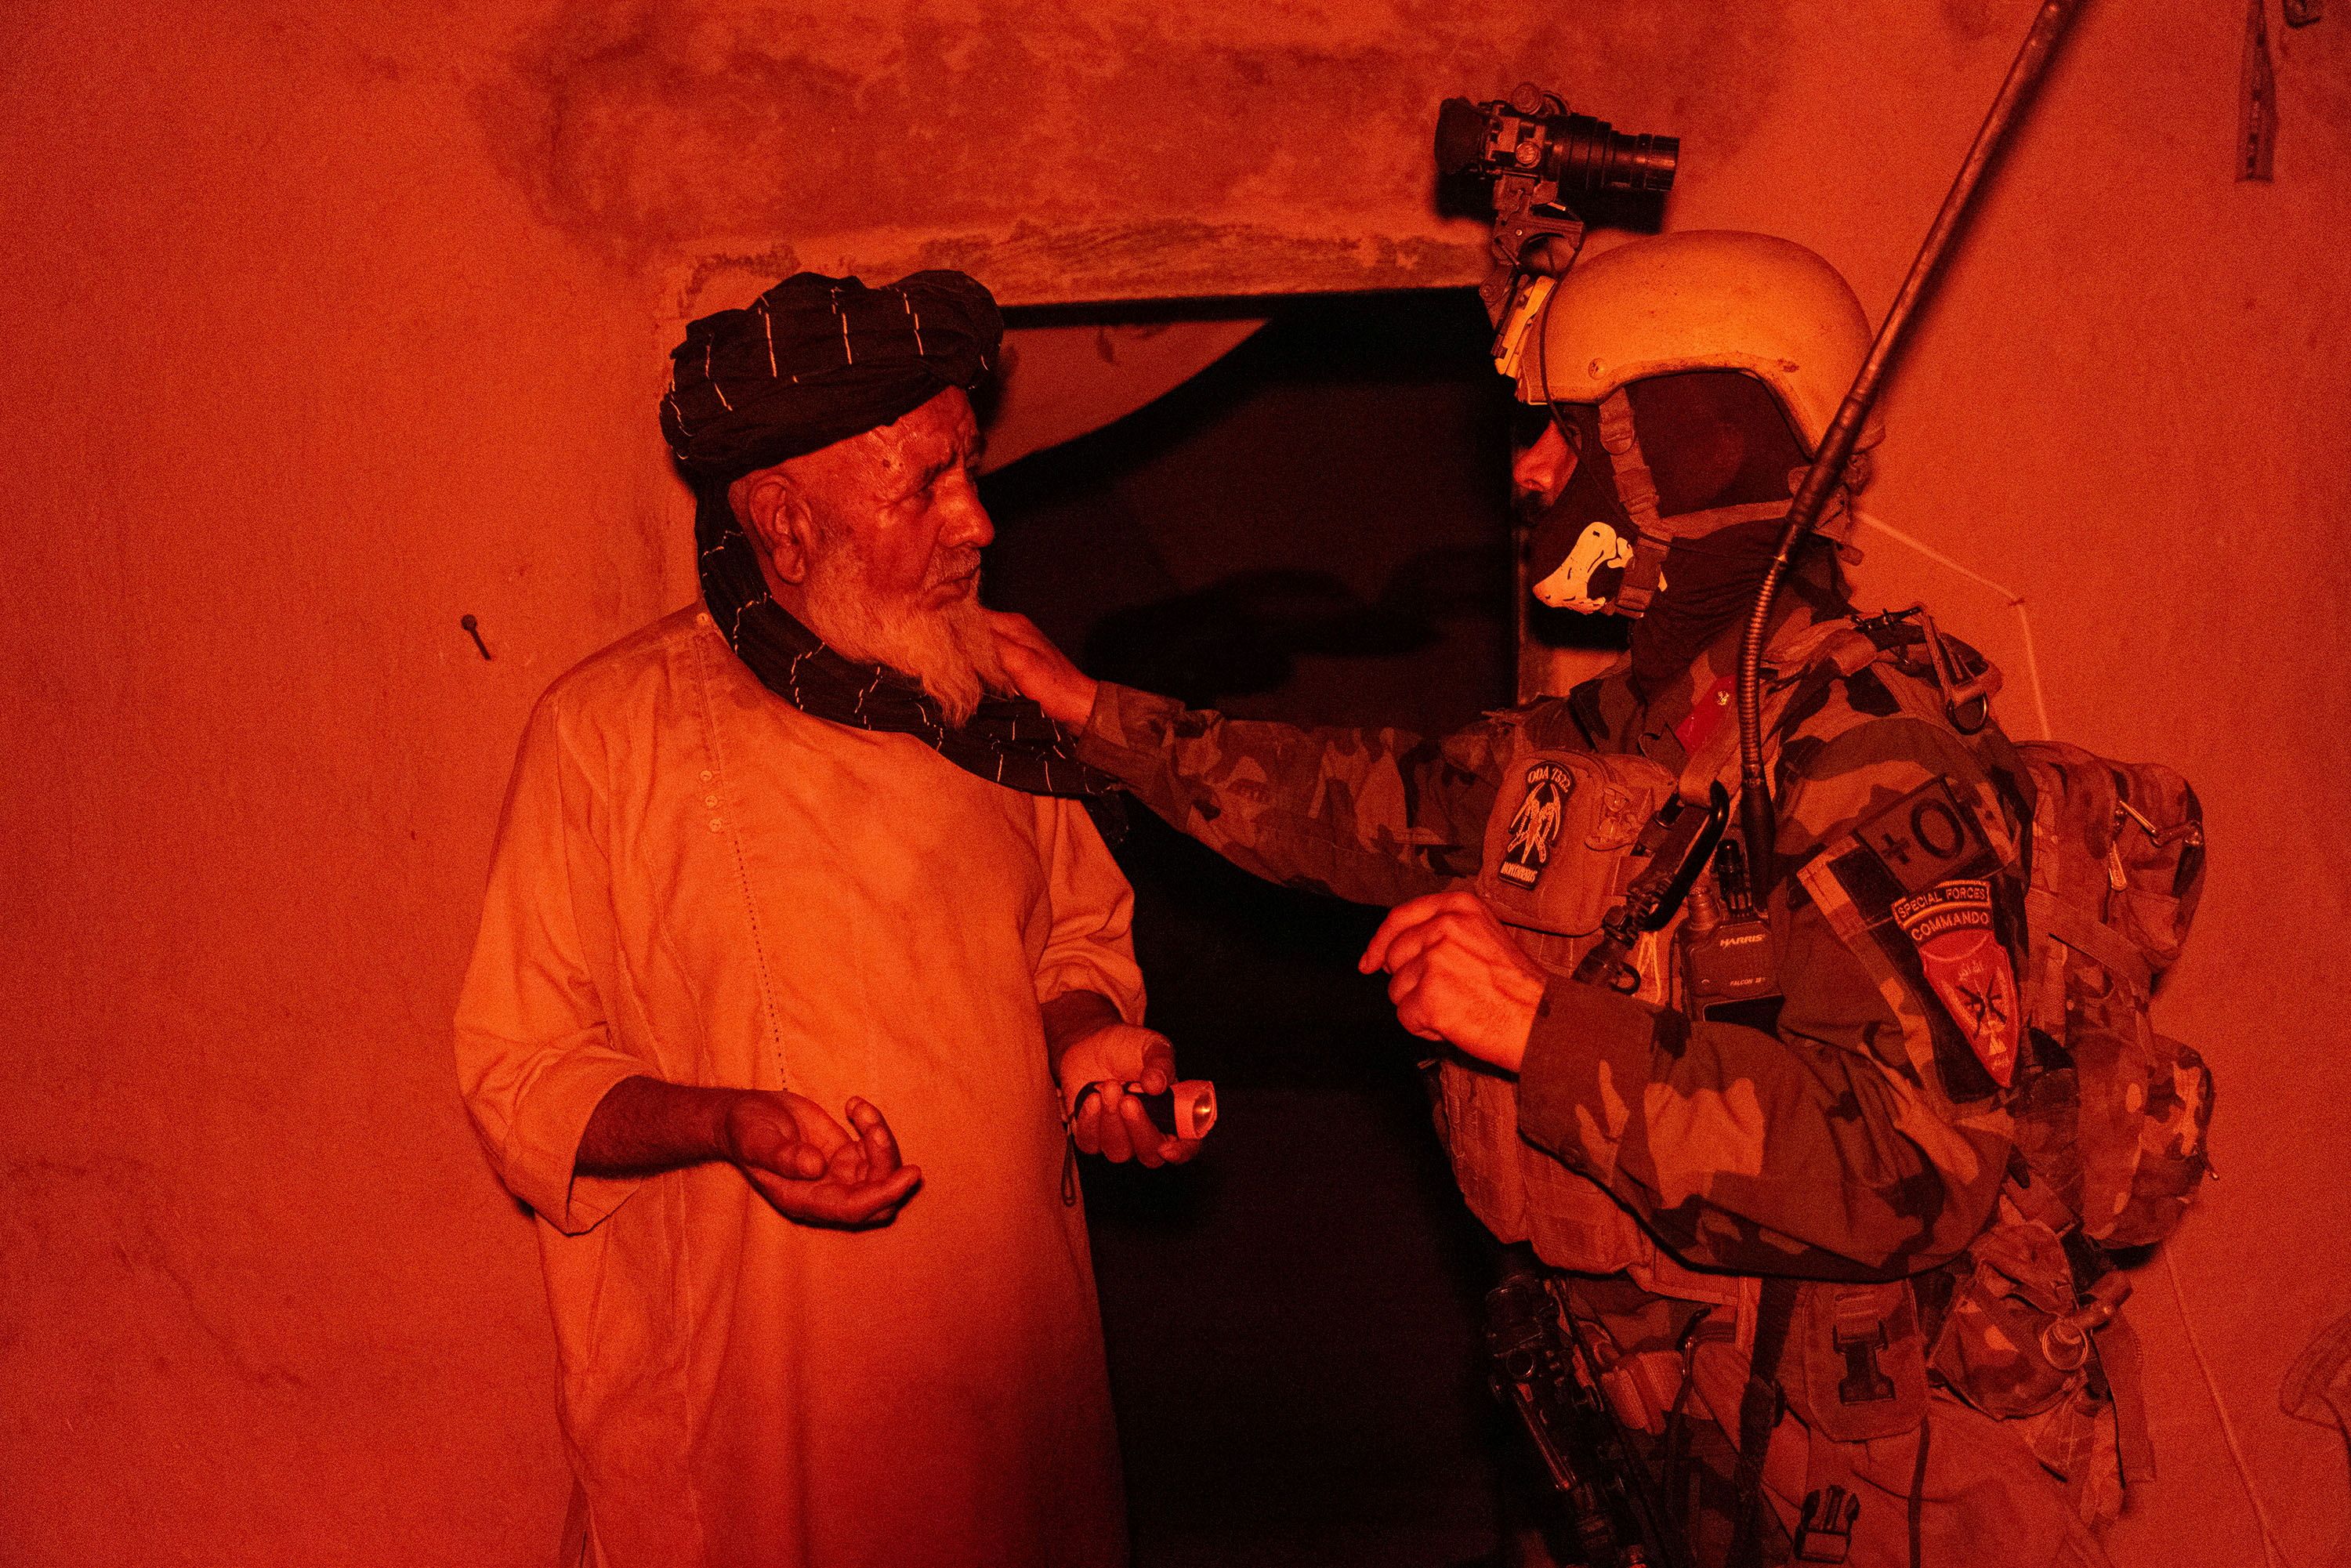 A member of the Afghan Special Forces speaks to a resident as others search his house during a mission against Taliban, in Kandahar province